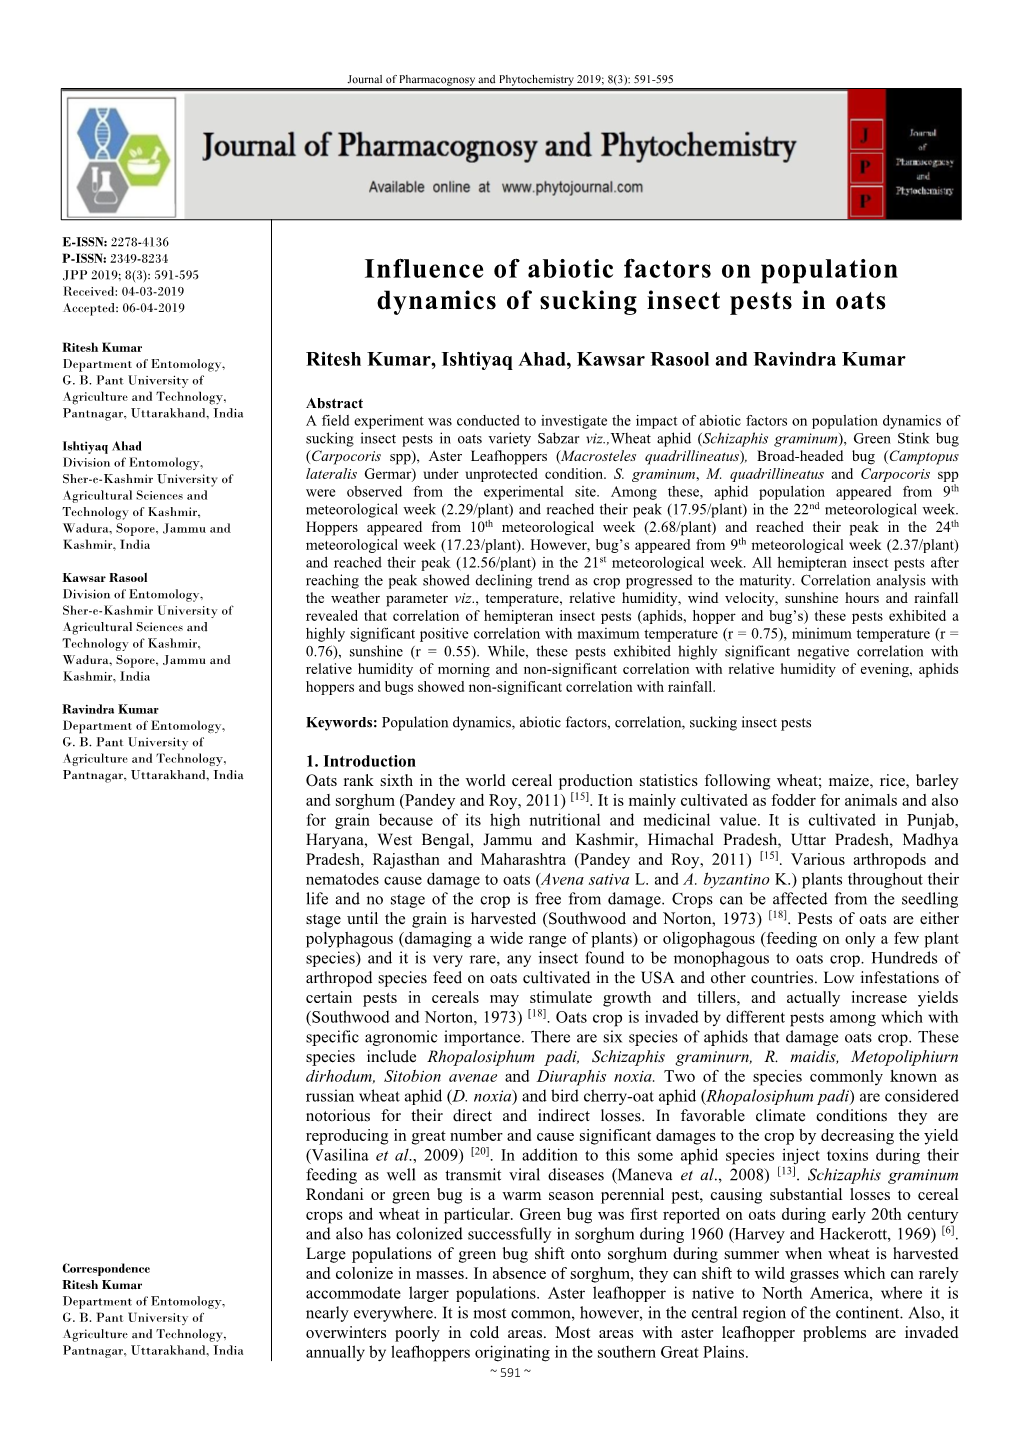 Influence of Abiotic Factors on Population Dynamics of Sucking Insect Pests in Oats